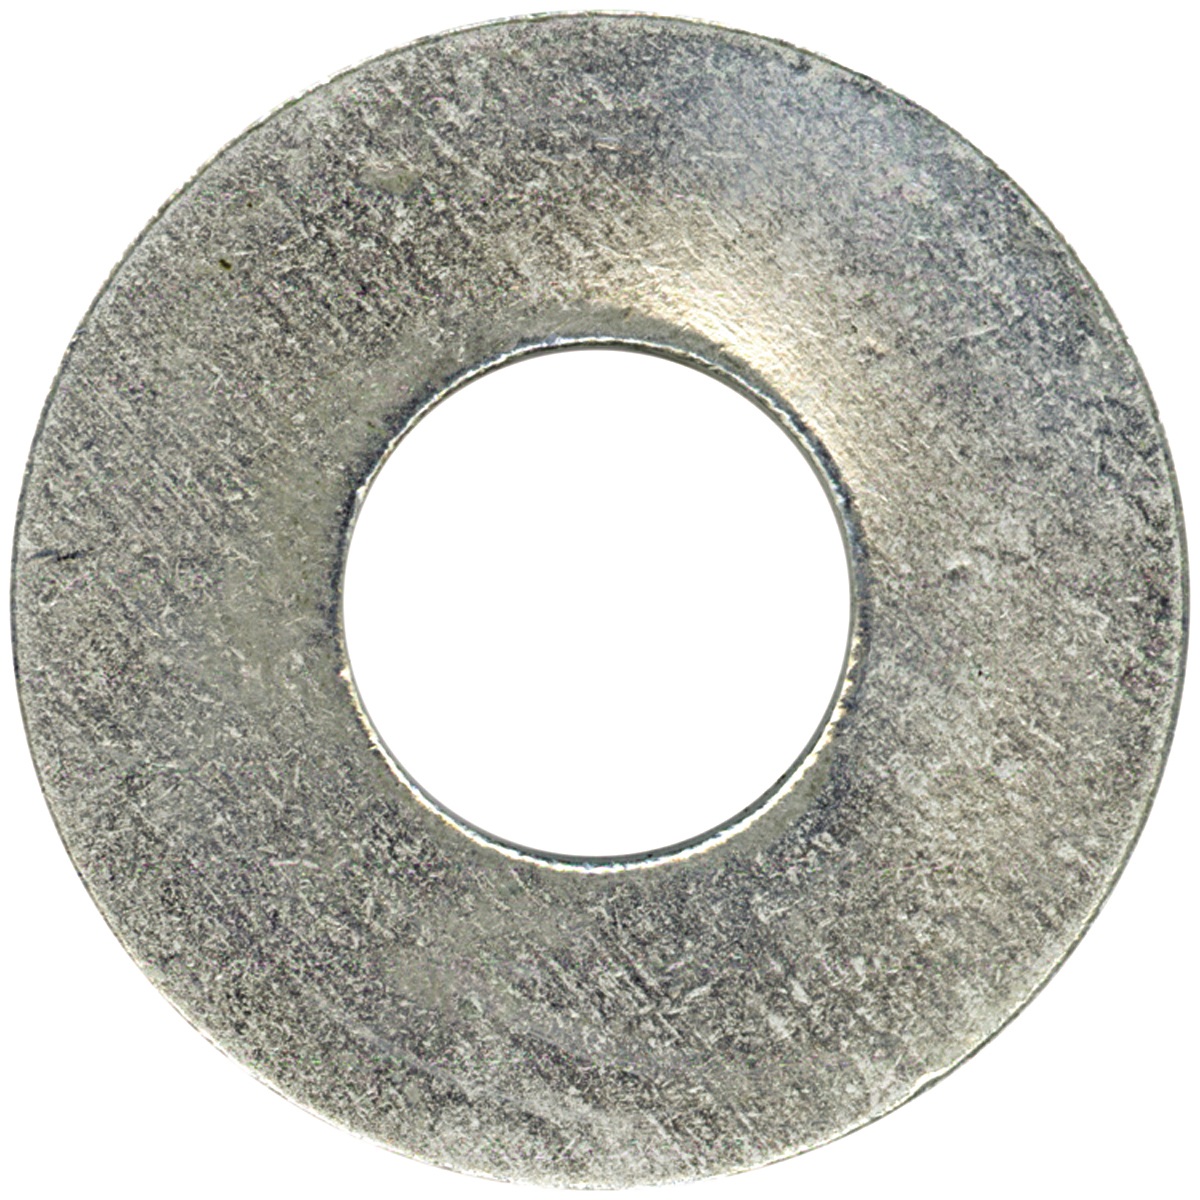 Metric E-Clip Retainers To Fit 2.75mm Shaft Pack of 10 